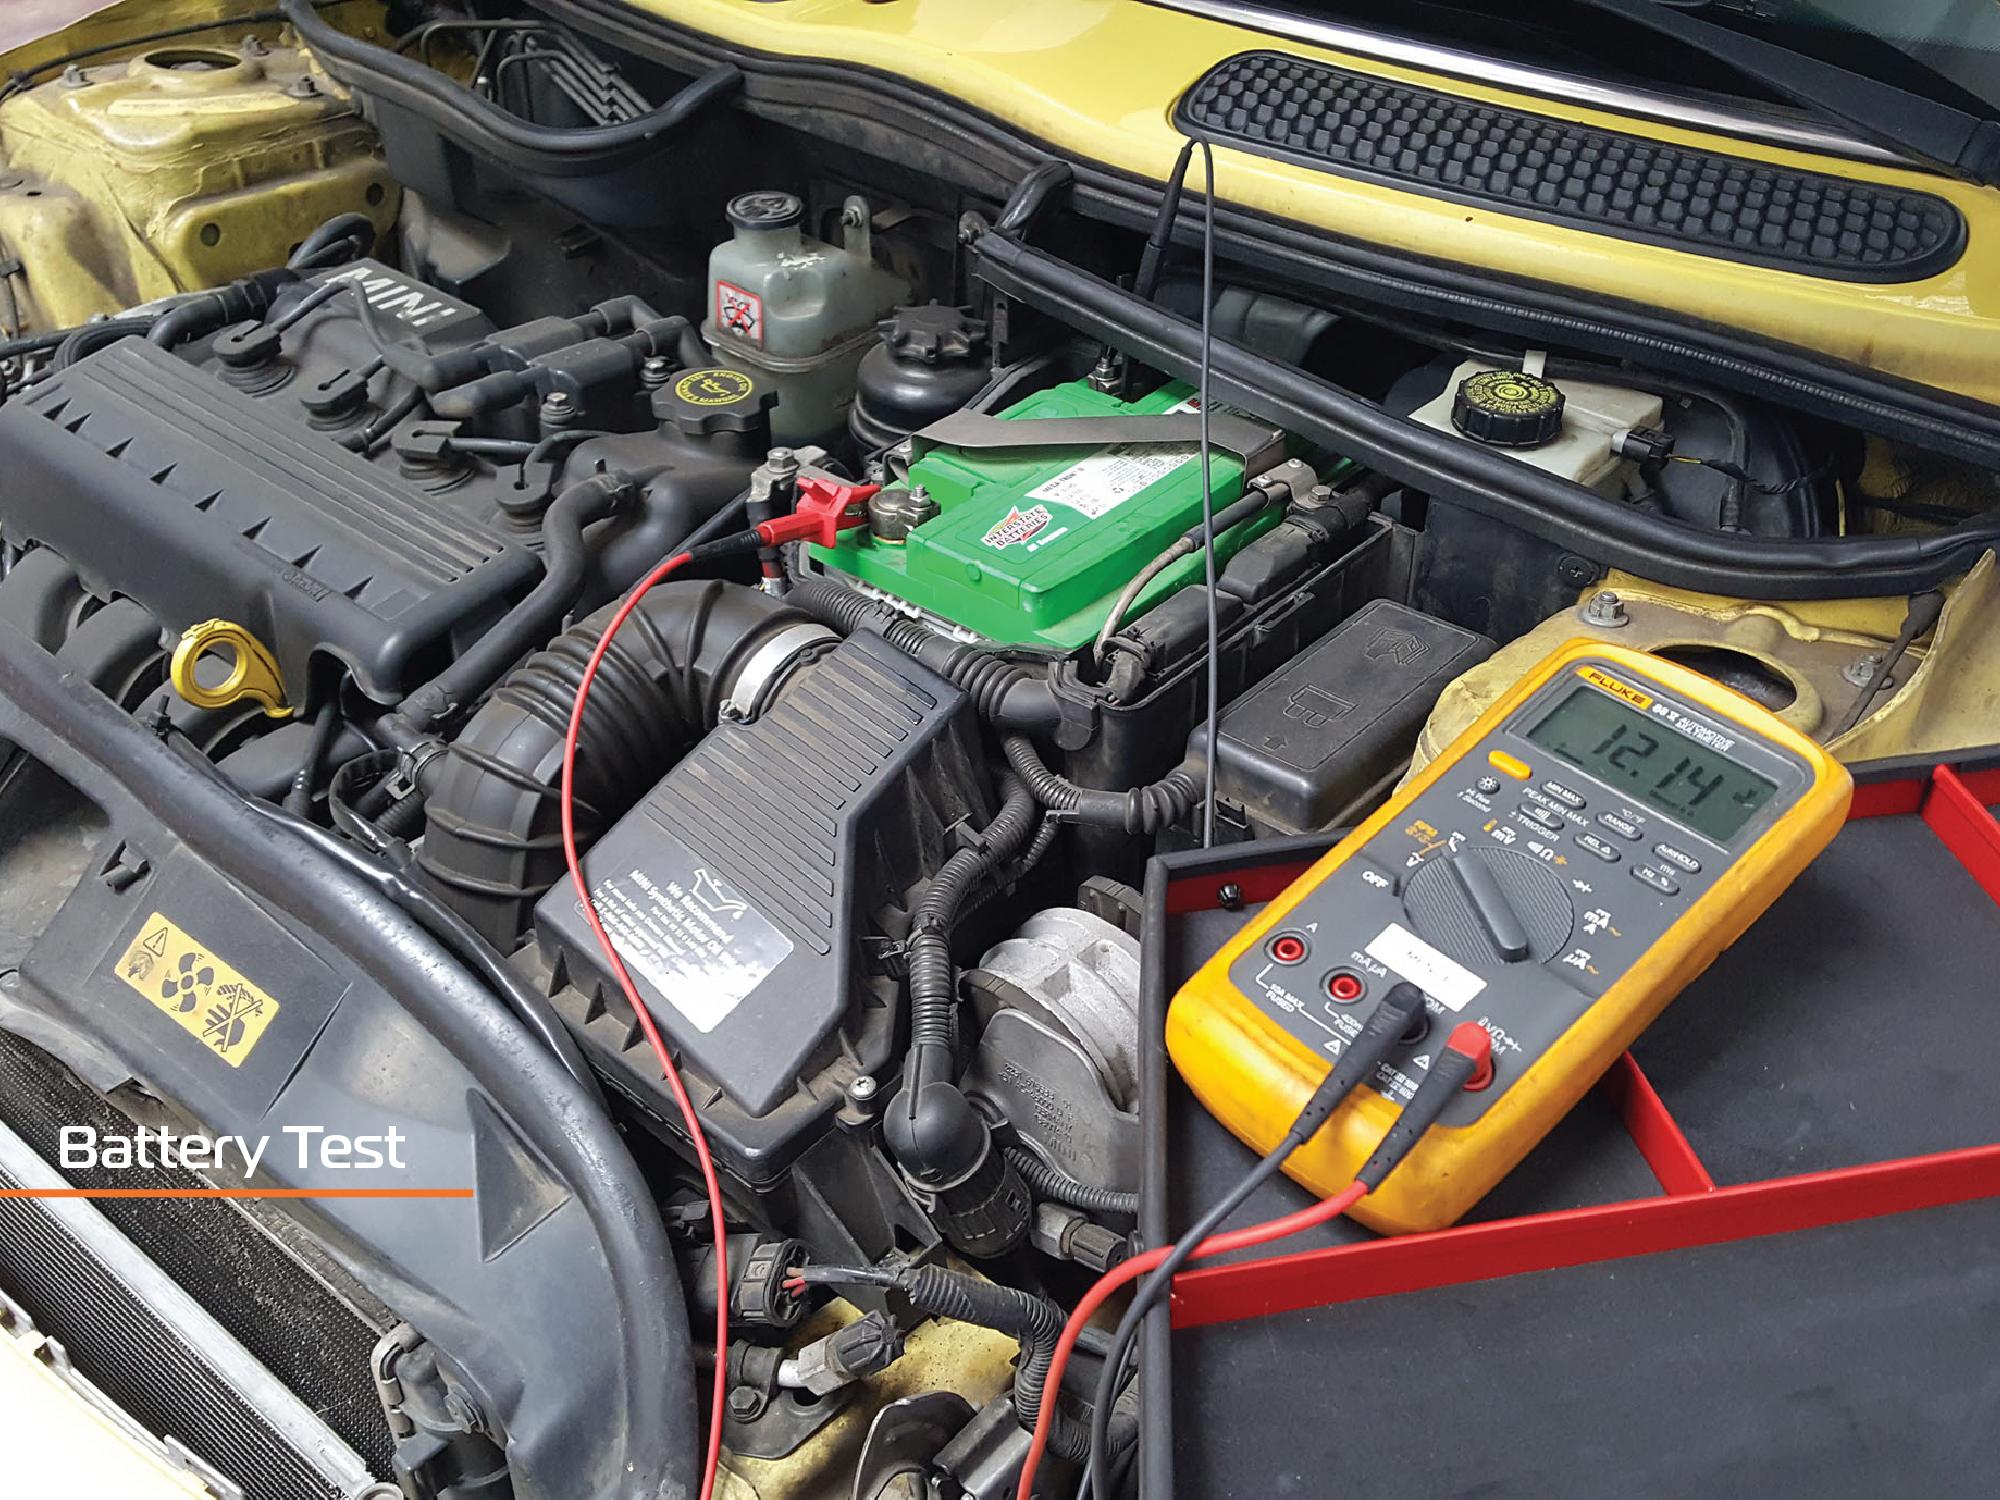 A battery test being done to a yellow mini cooper